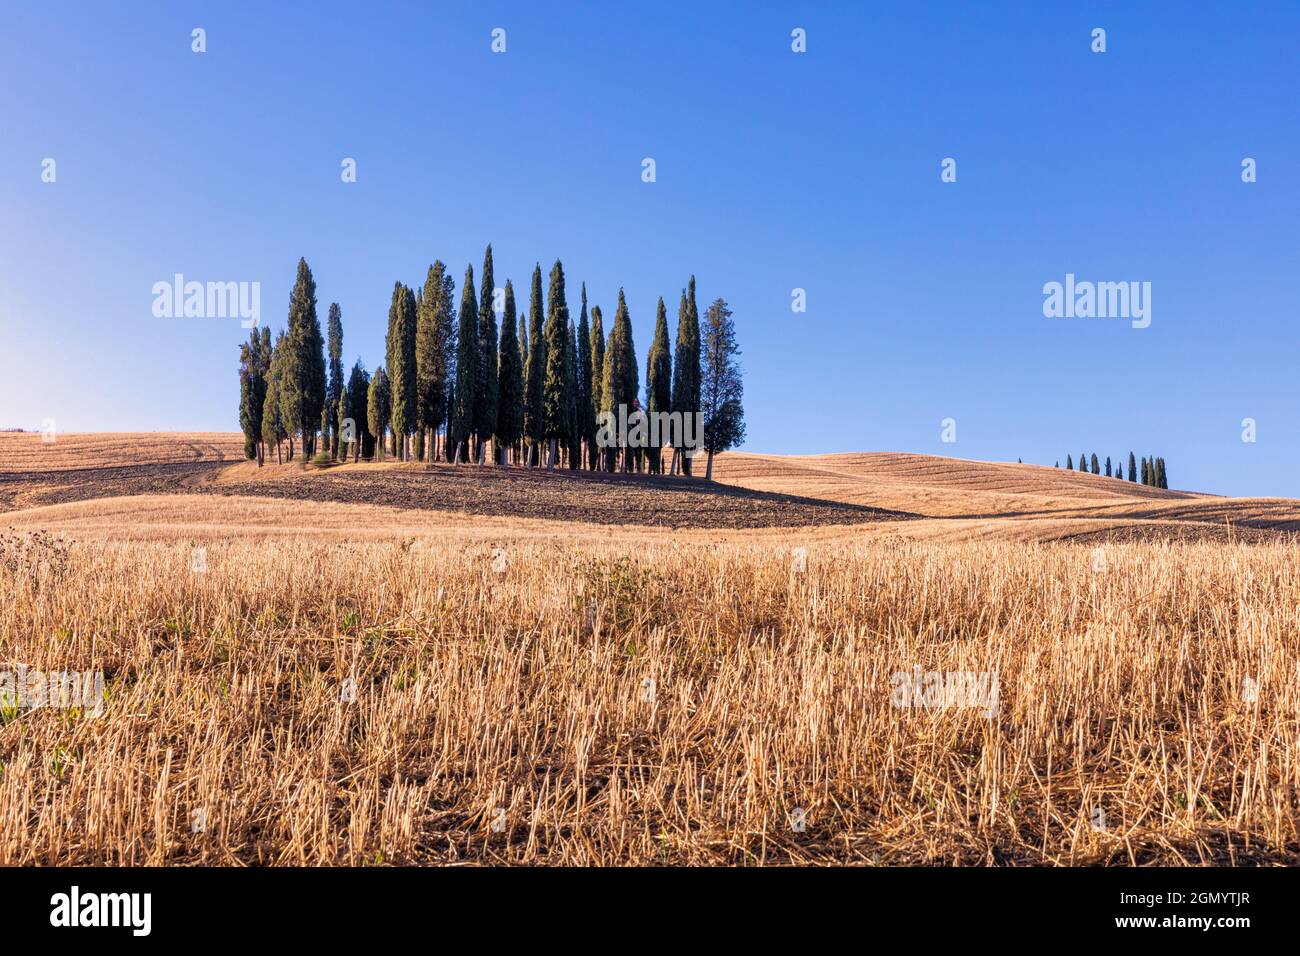 Grove of Cypress trees in fields of wheat and wildflowers near San Quirico, Tuscany, Italy Stock Photo